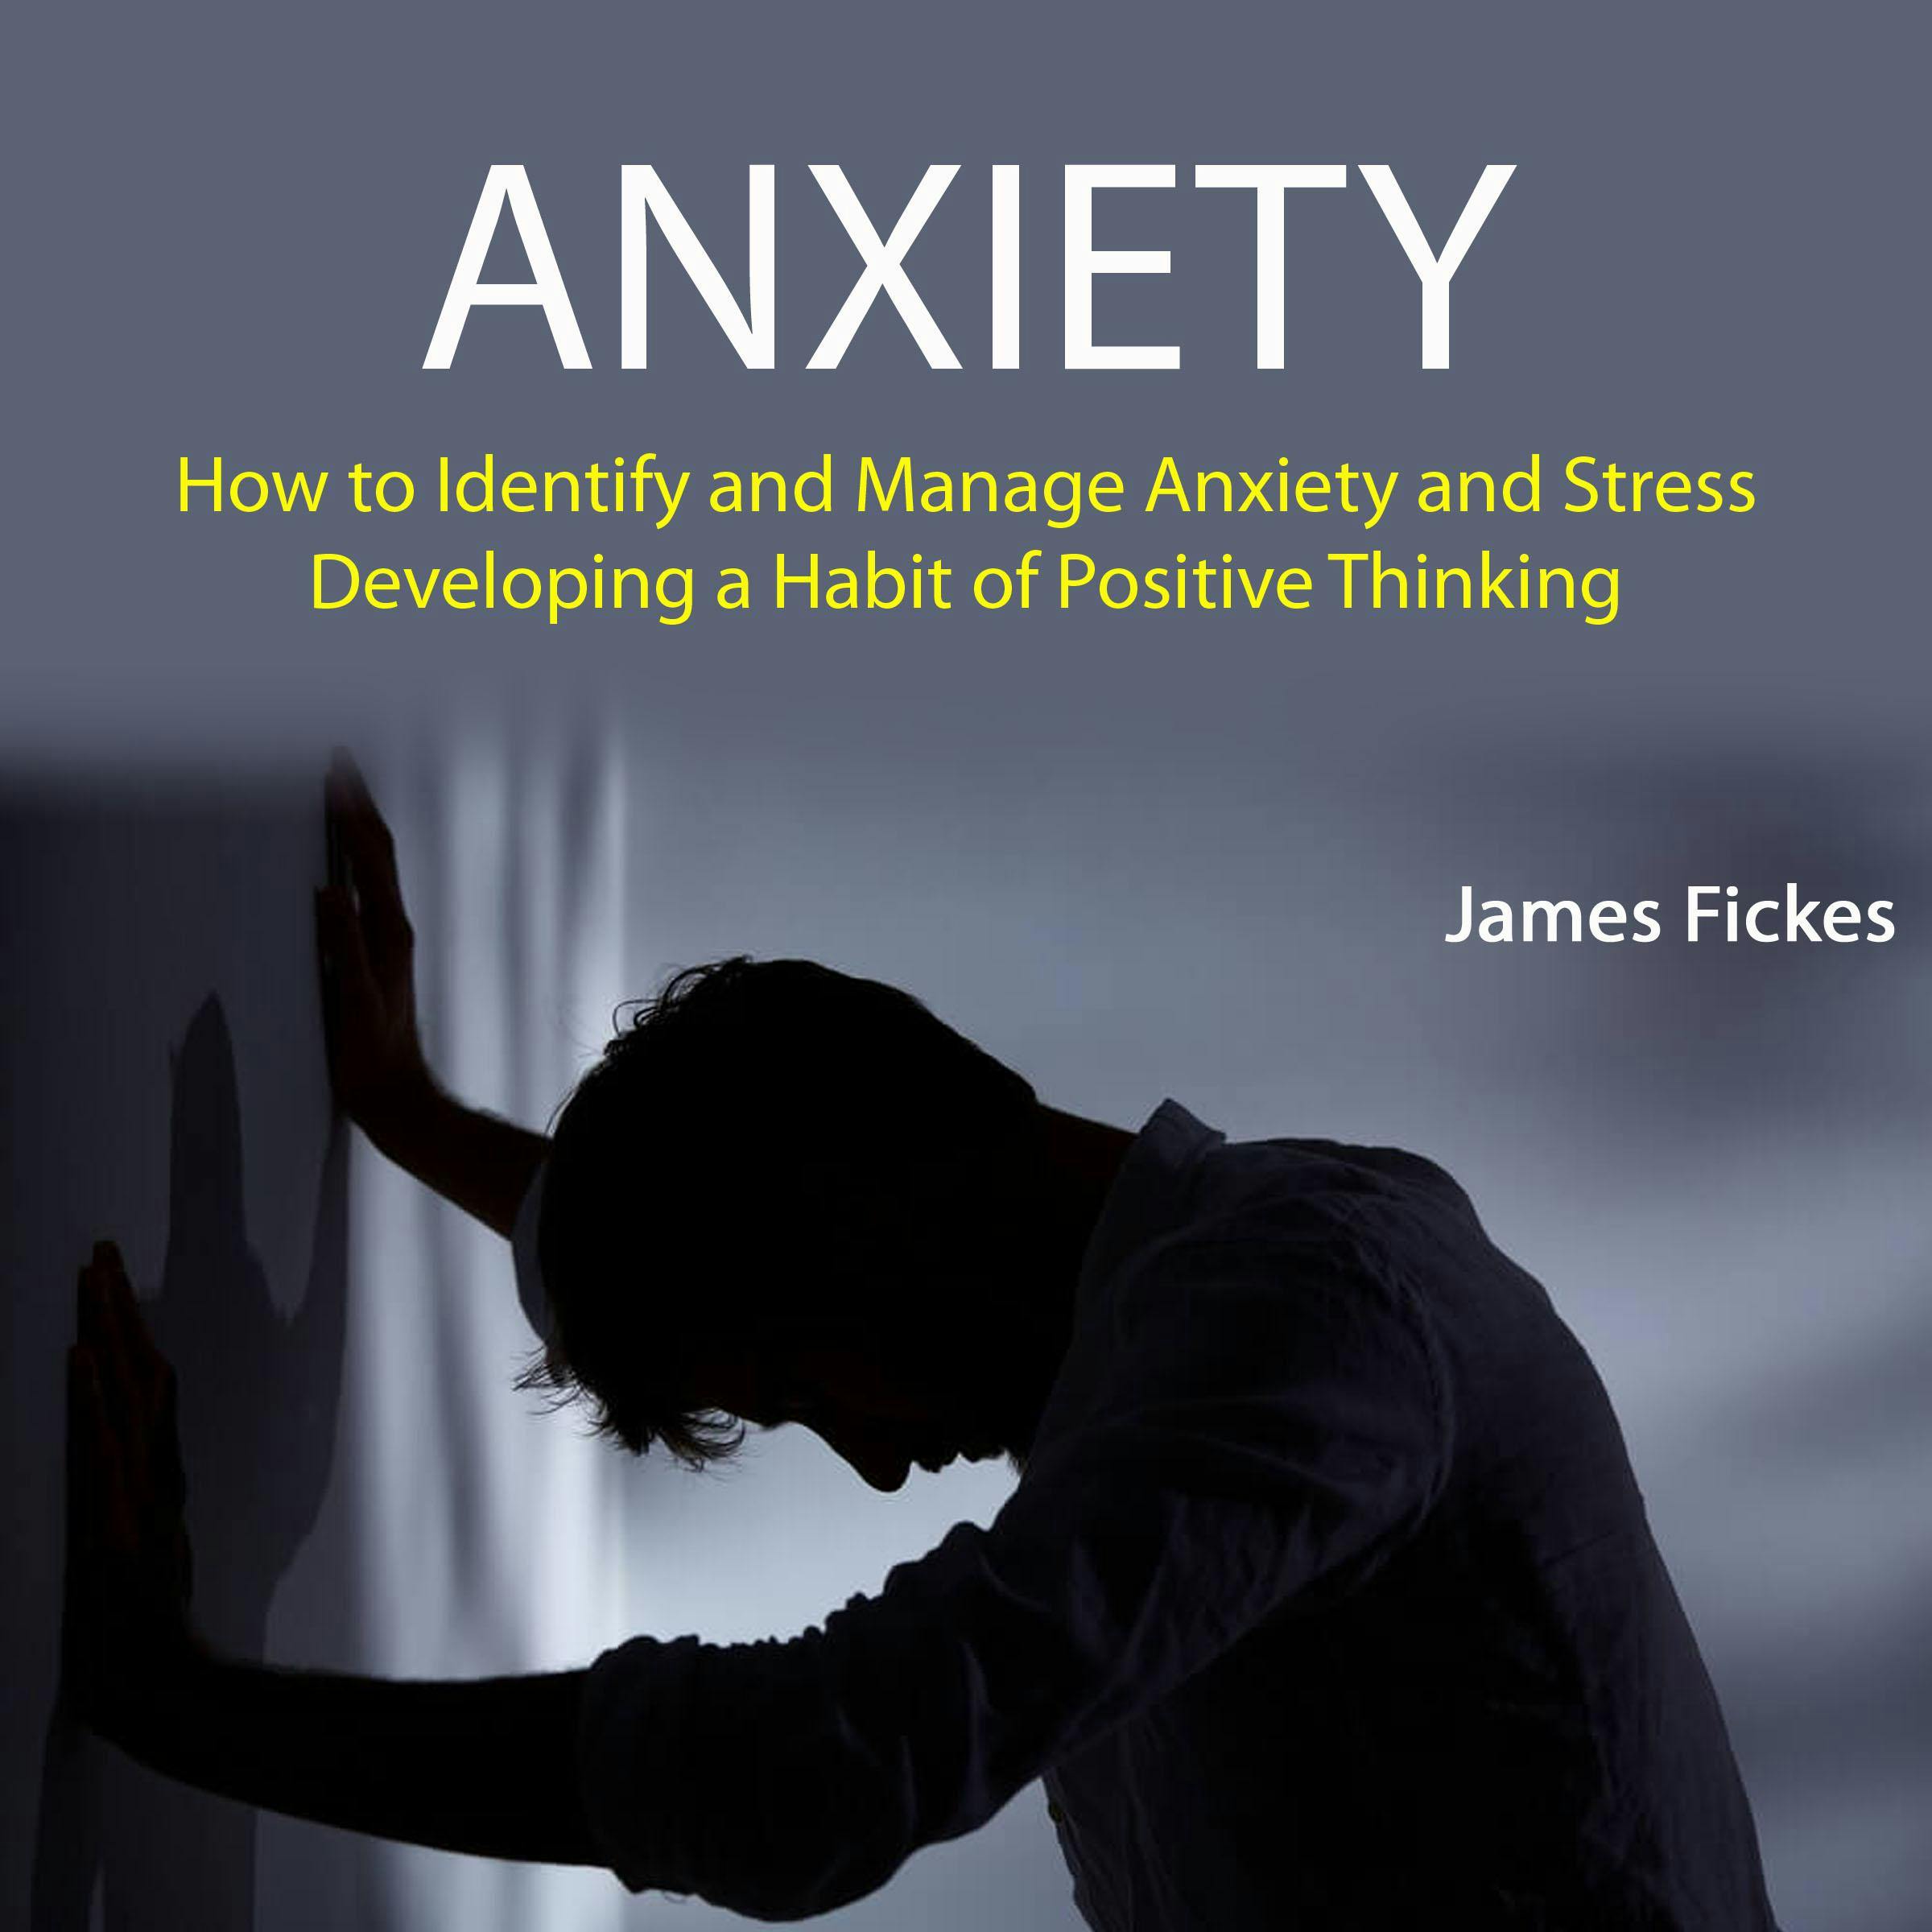 Anxiety: How to Identify and Manage Anxiety and Stress (Developing A Habit of Positive Thinking) - James Fickes